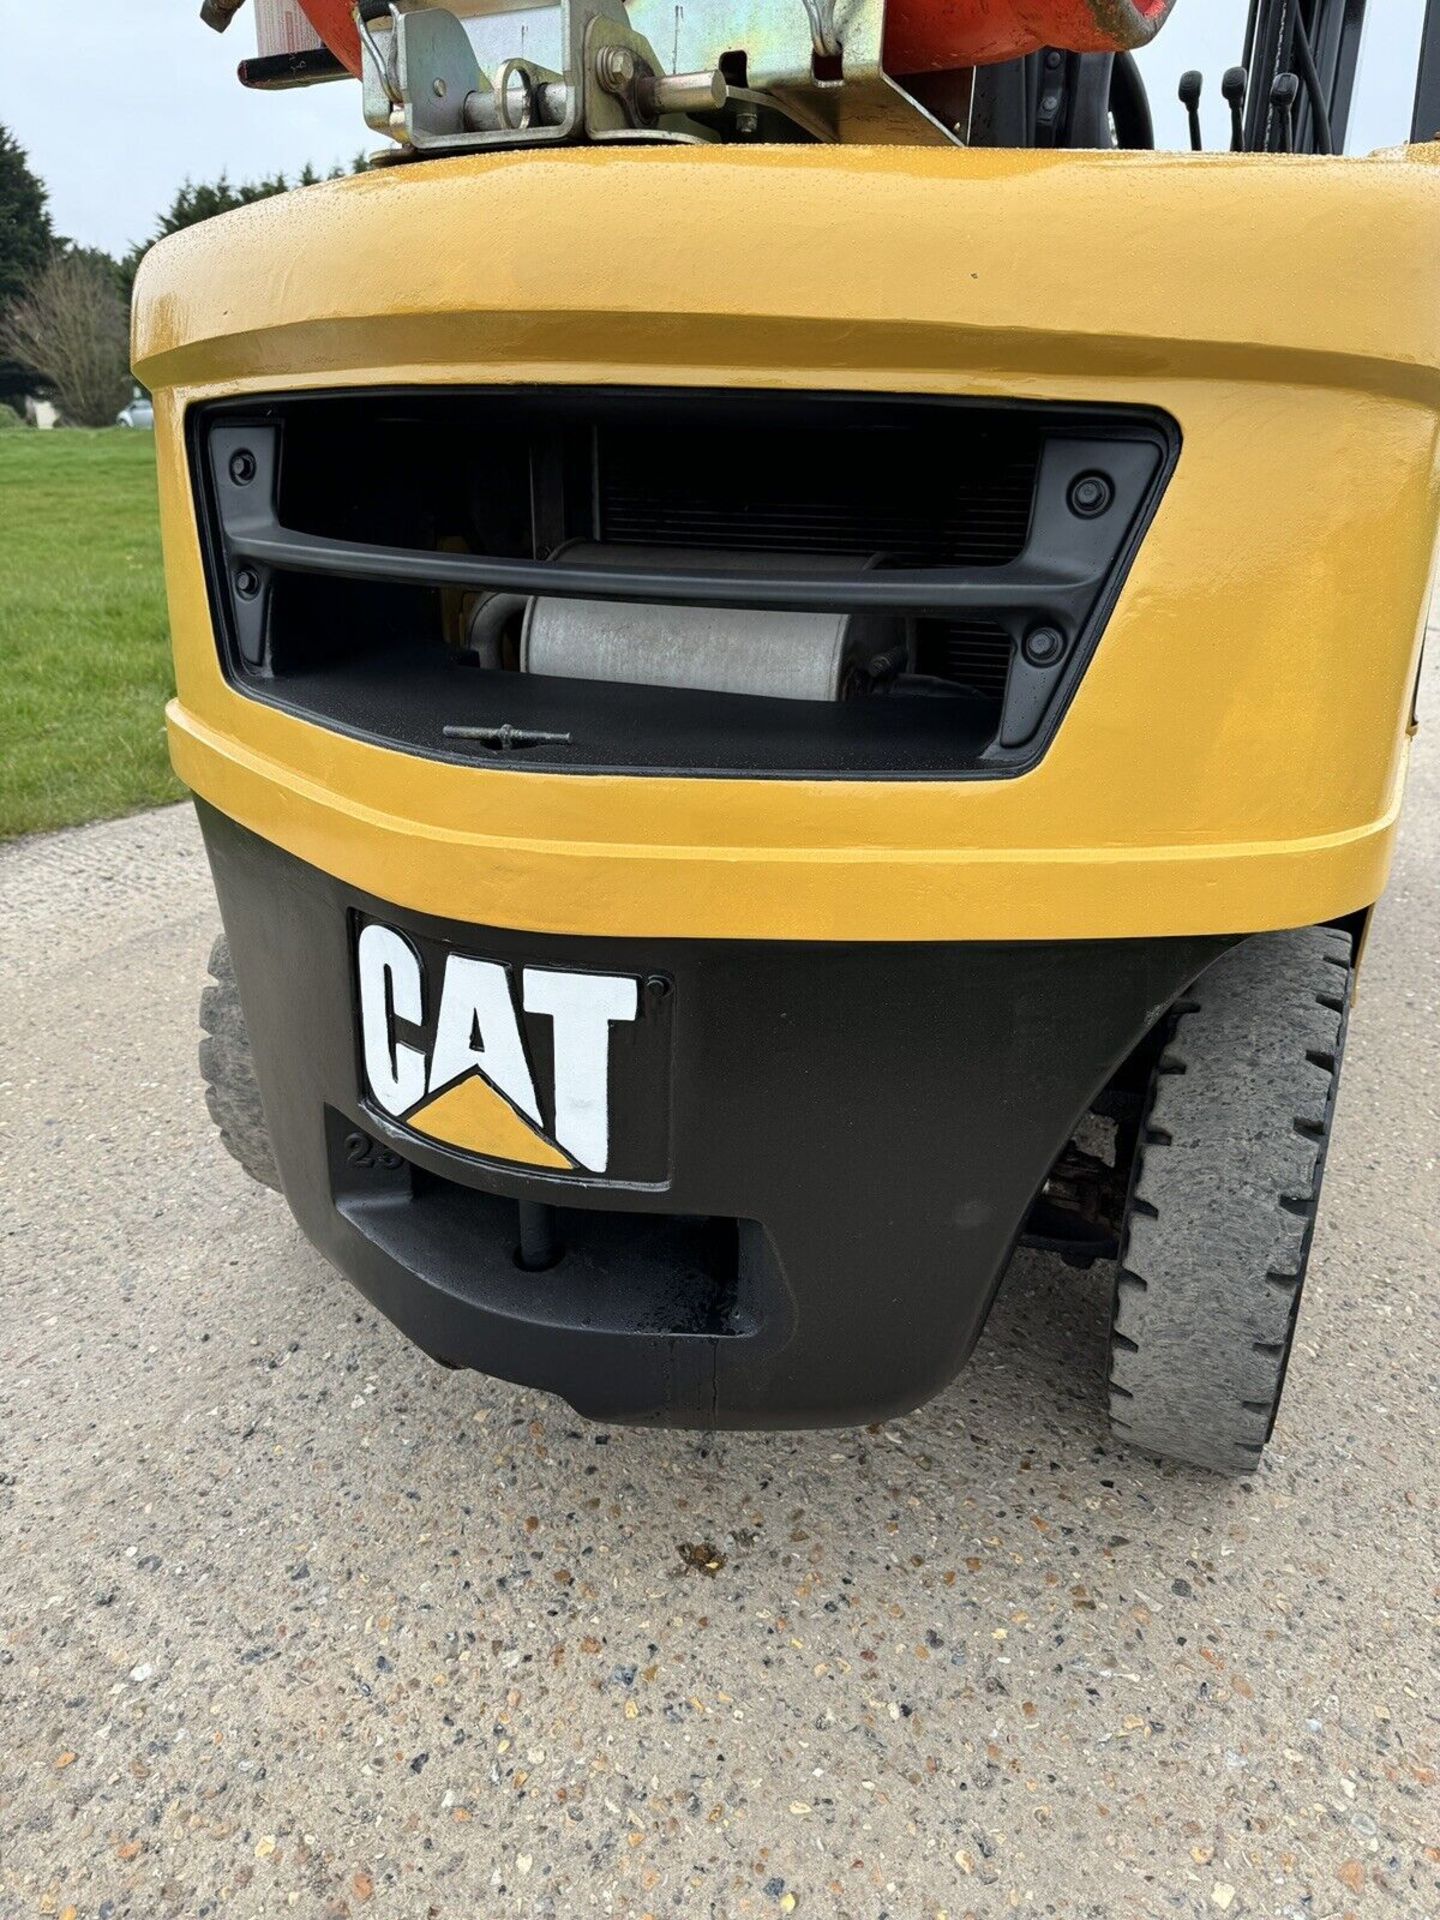 2015, CATERPILLAR - 2.5 Tonne Gas Forklift With Side Shift - Image 3 of 6